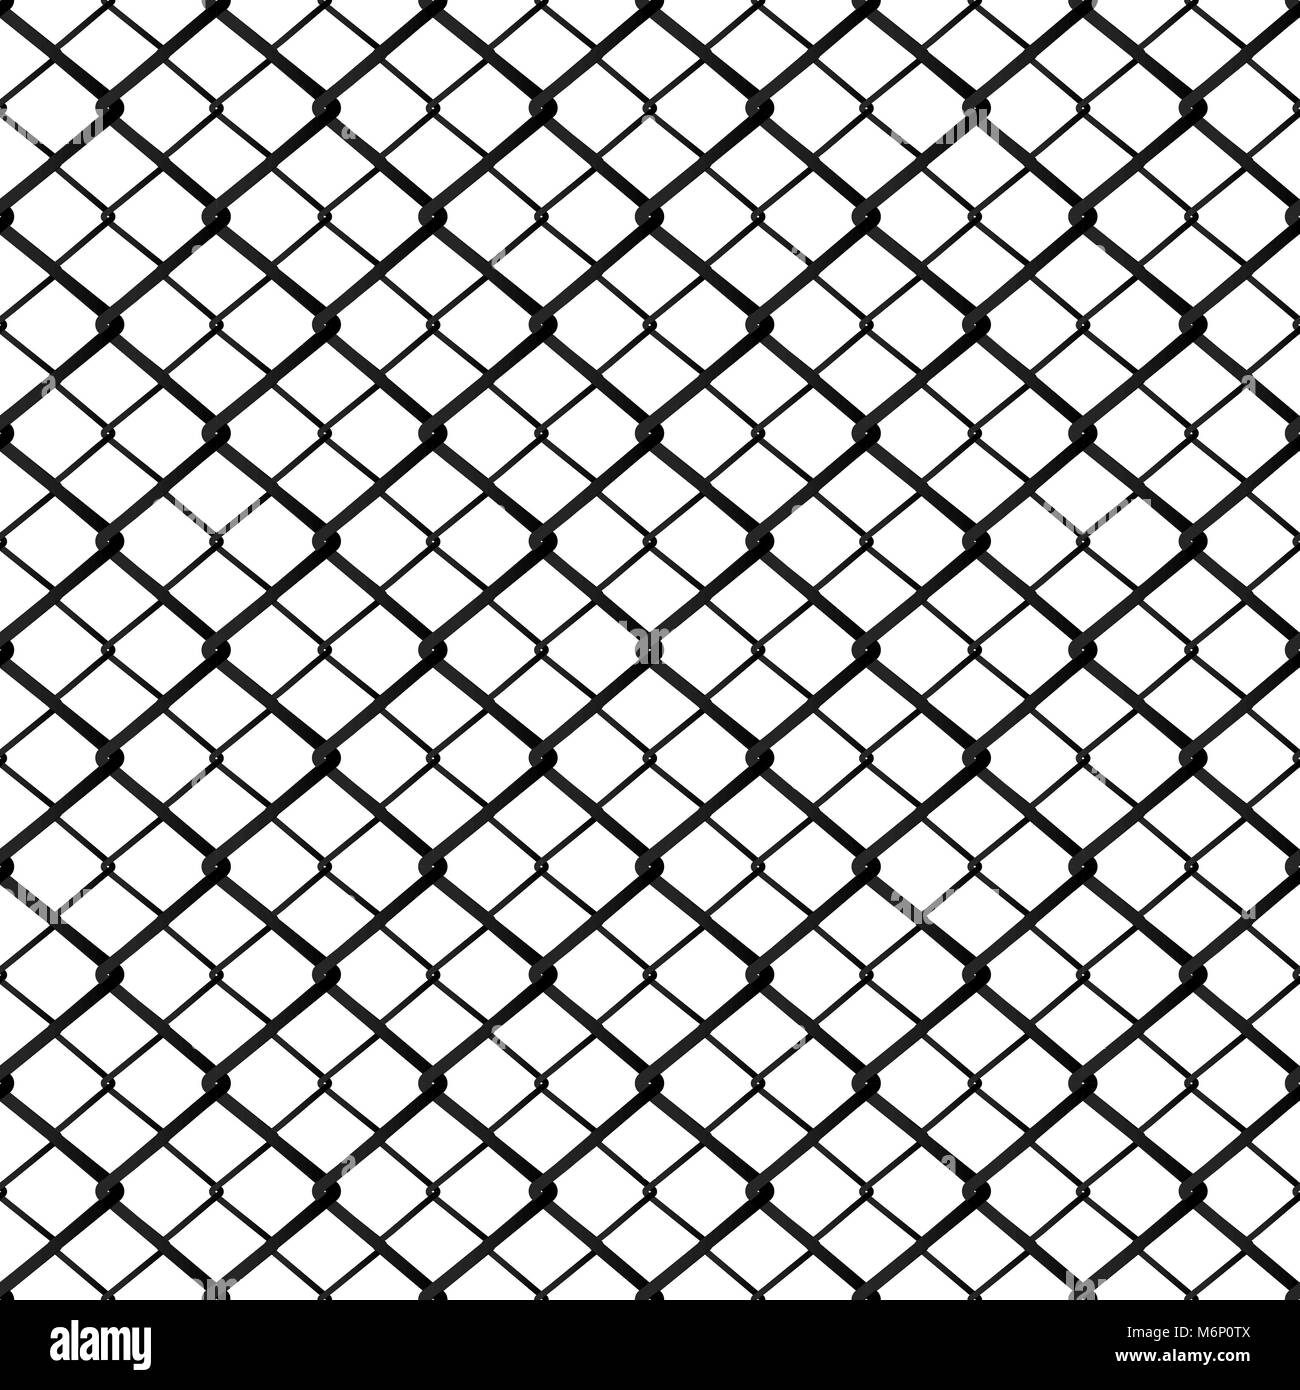 Metal chained fence Stock Vector Images - Alamy